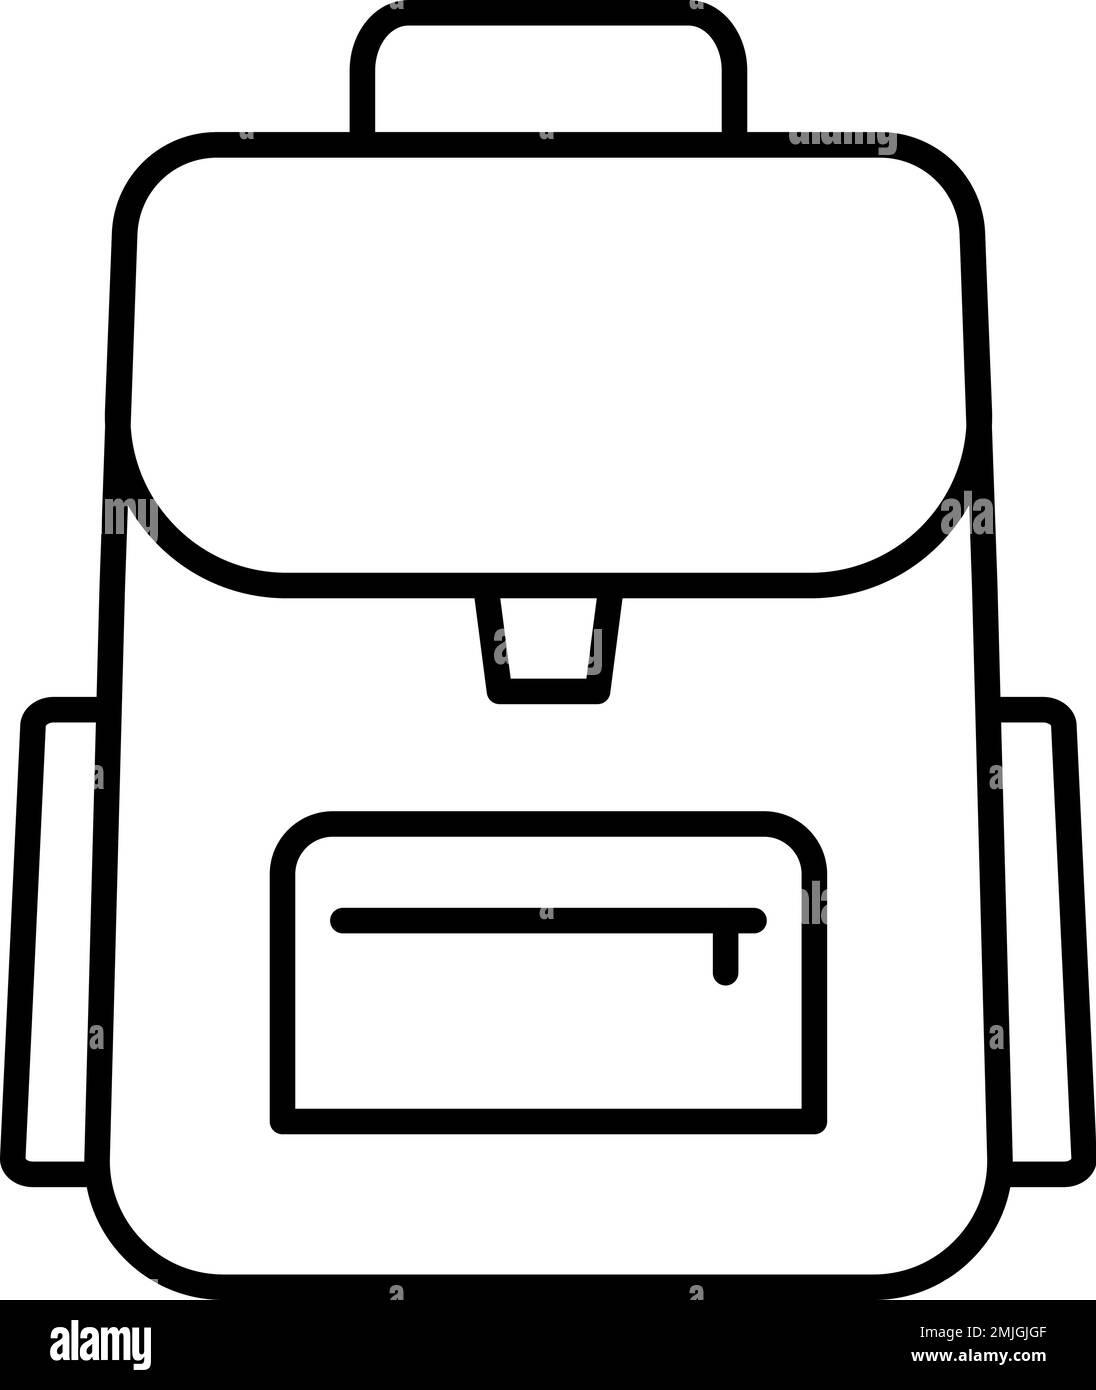 School bag equipment isolated icon Royalty Free Vector Image